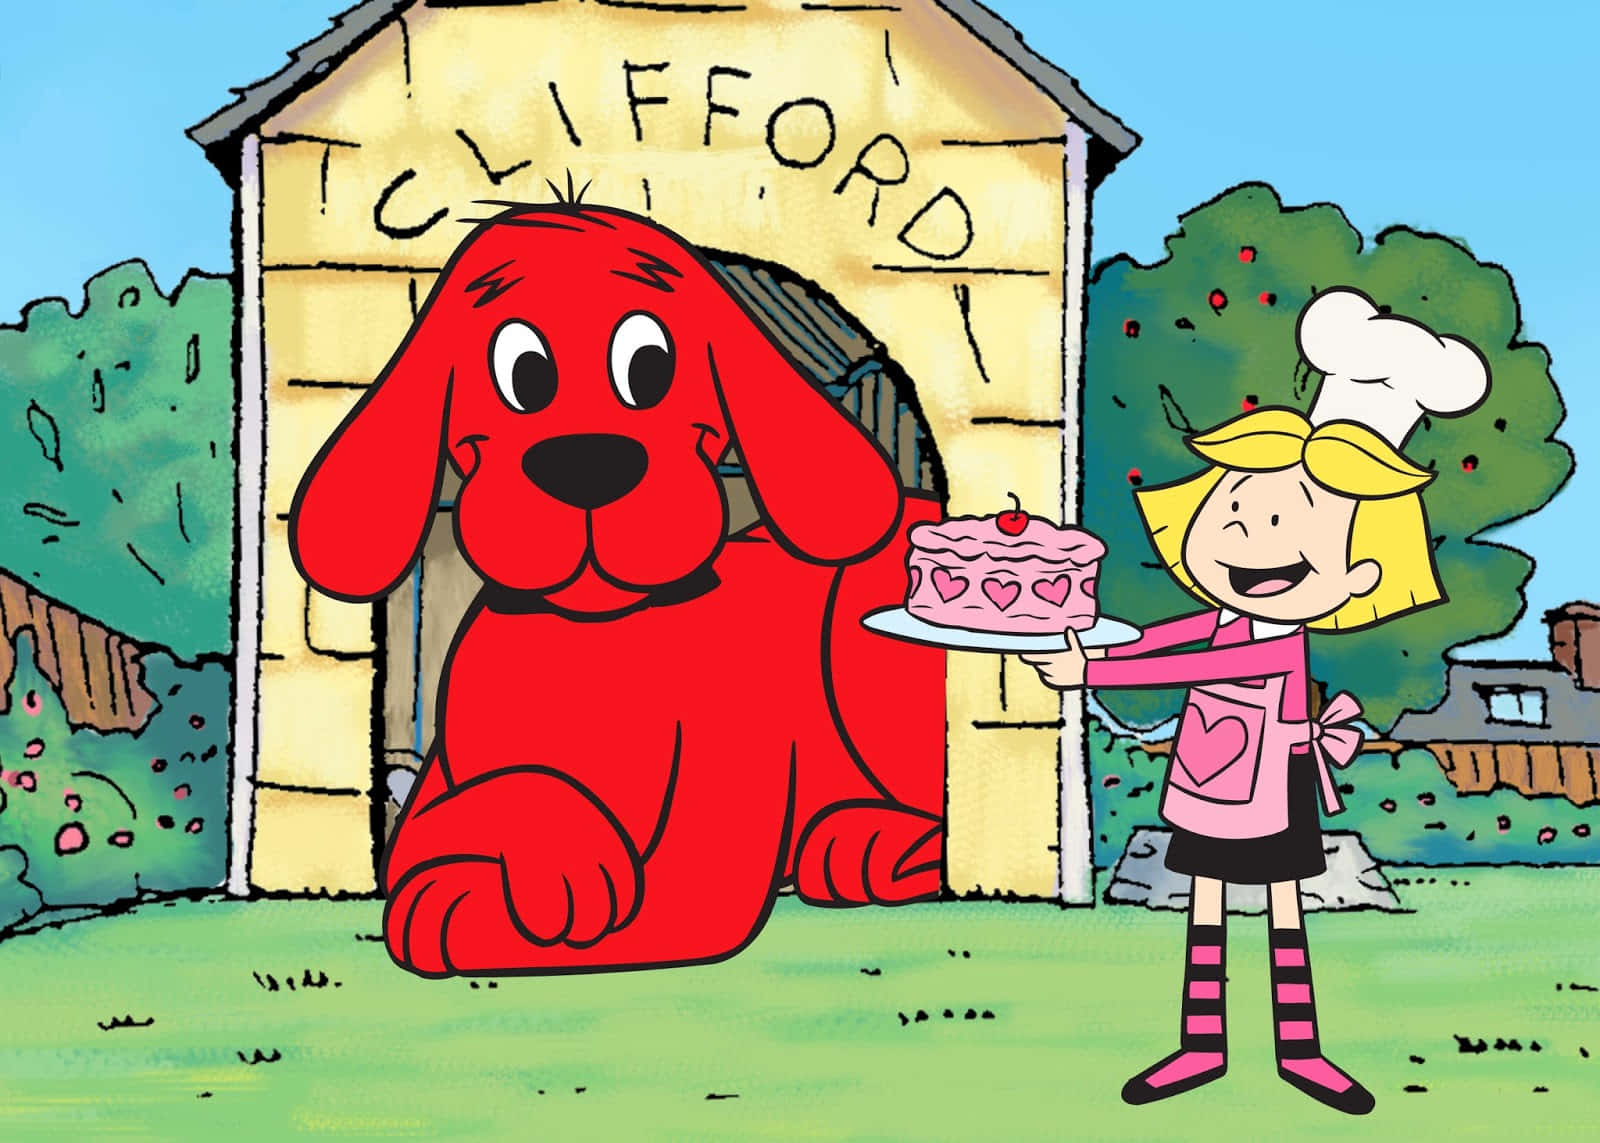 Clifford the Big Red Dog, a Friendly Companion and Protector of the Family